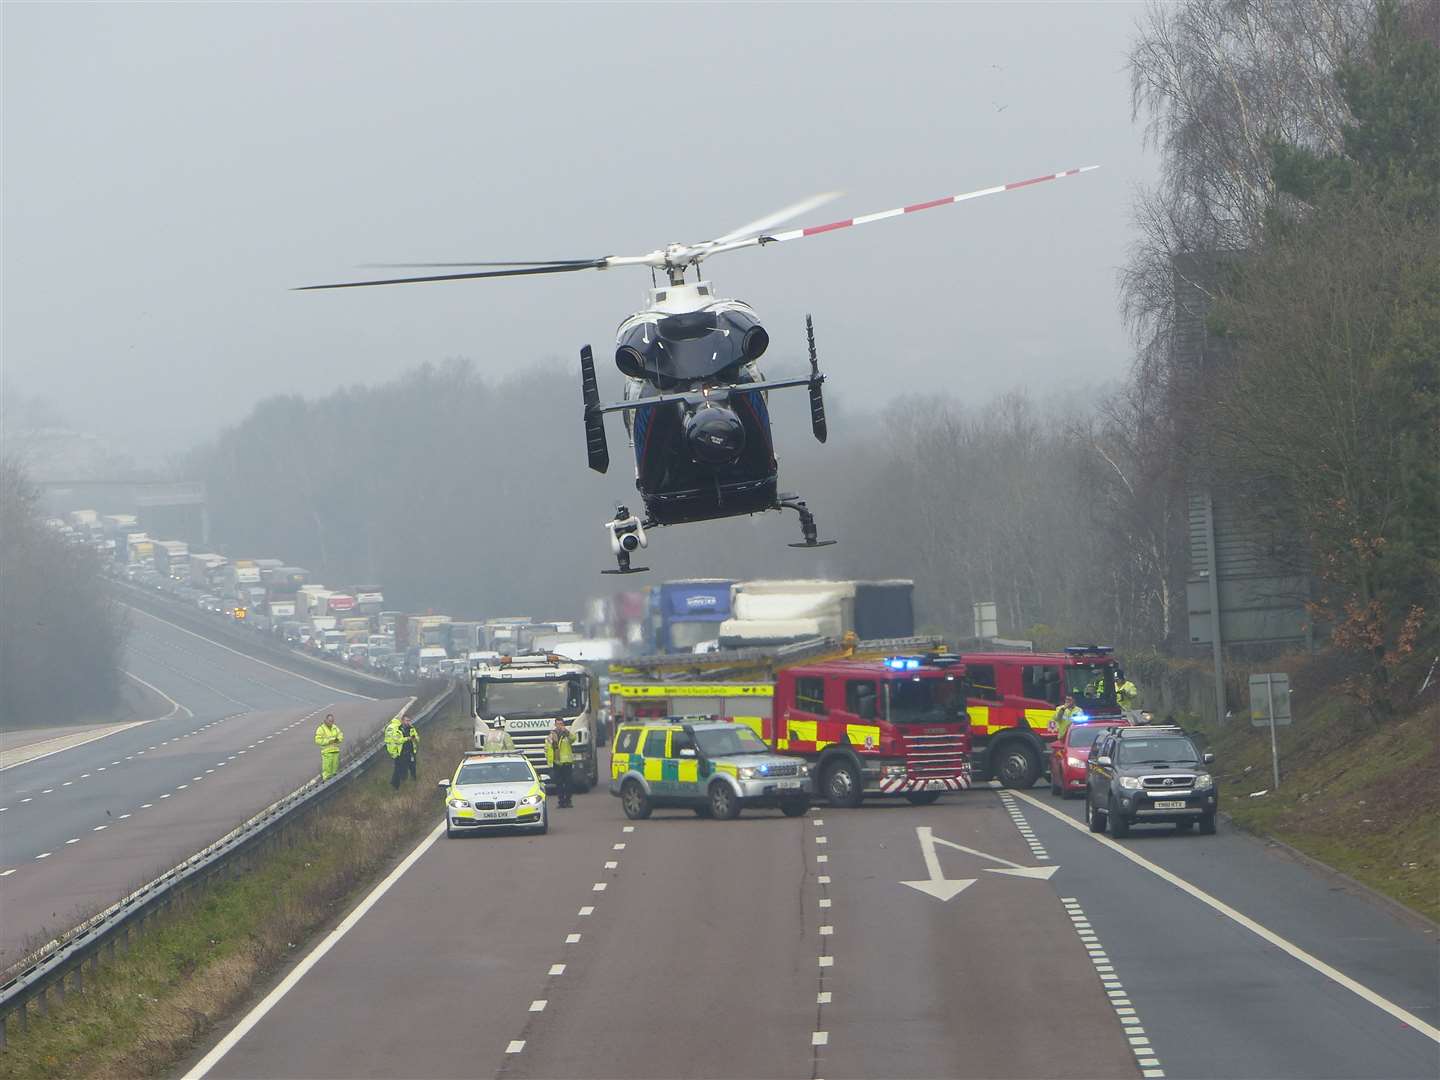 The air ambulance taking off from the scene. Picture: Andy Clarke